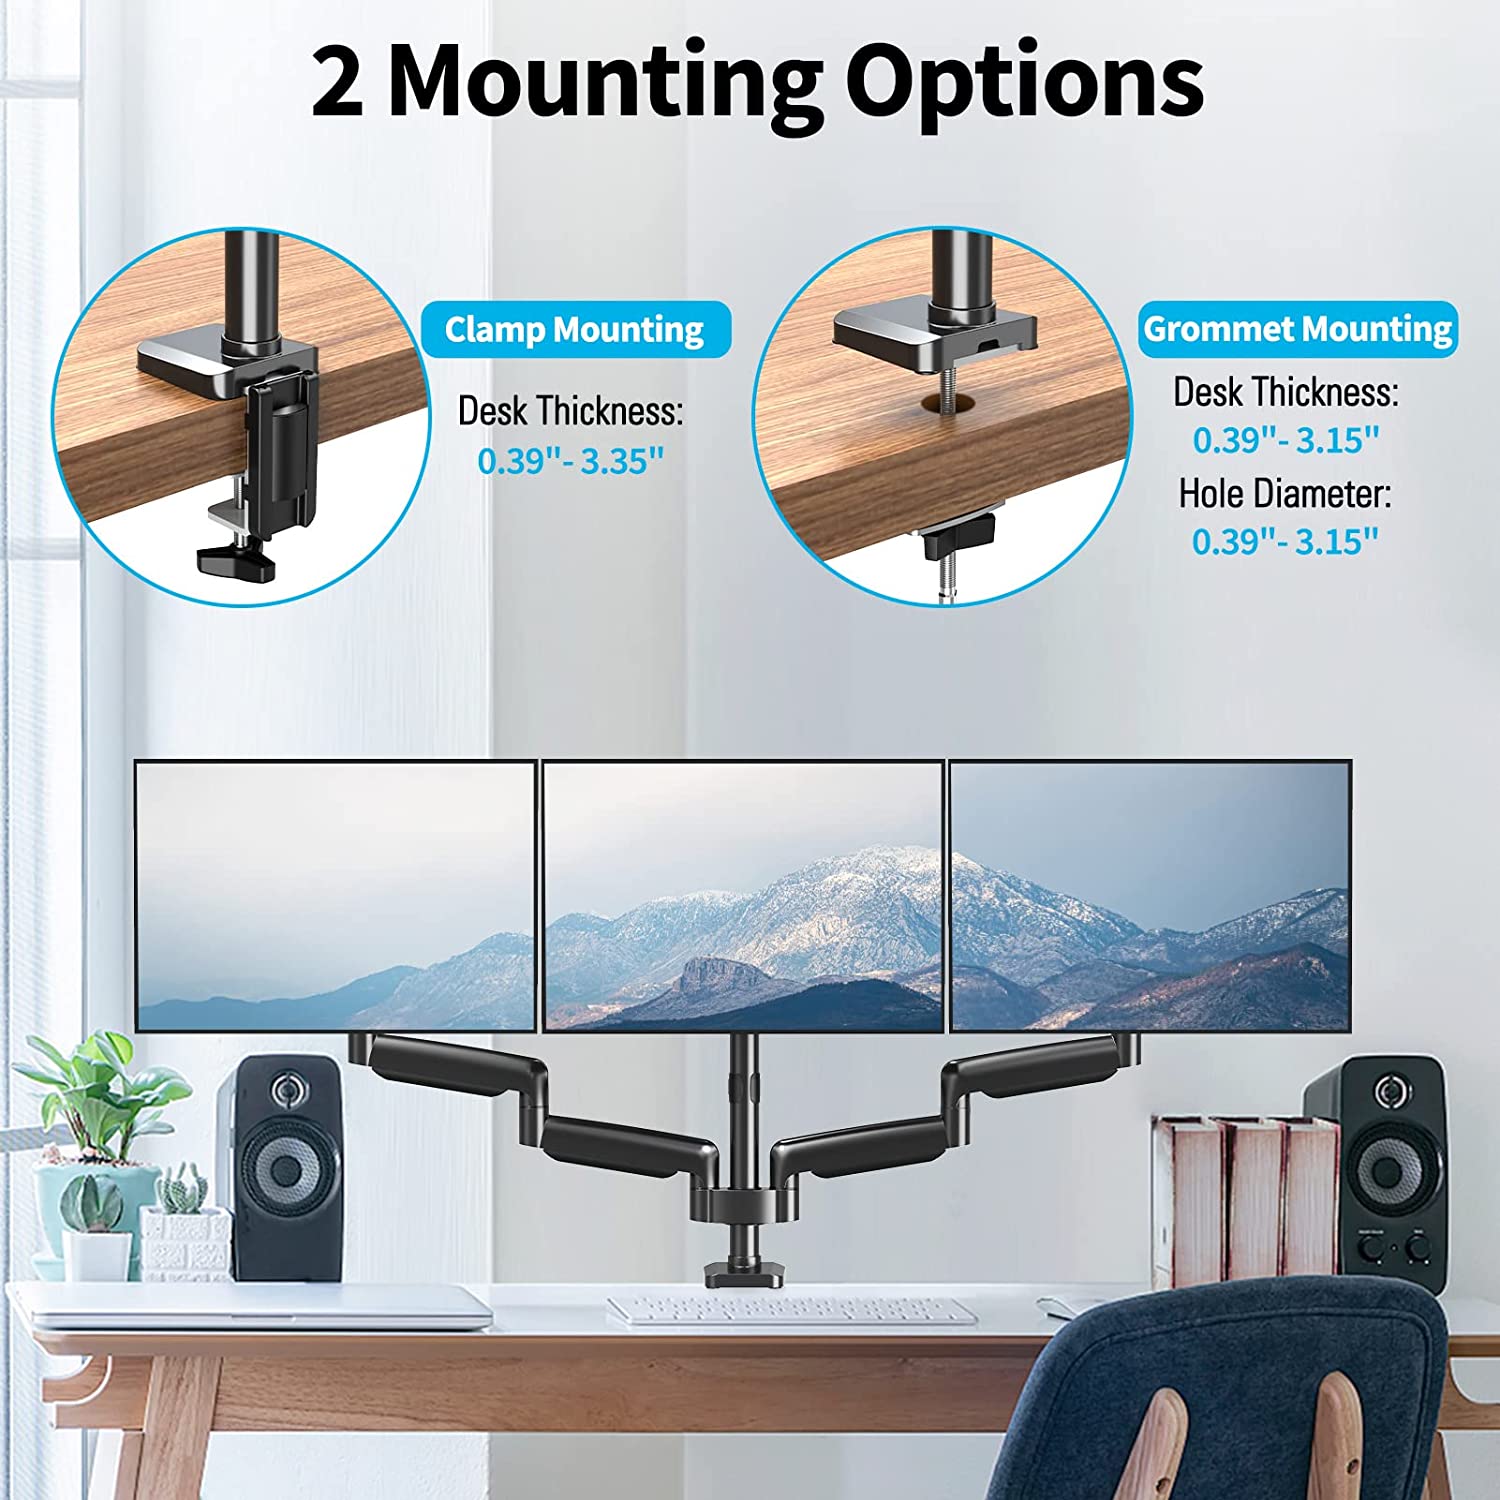 choosing clamp or grommet to install the triple monitor mount